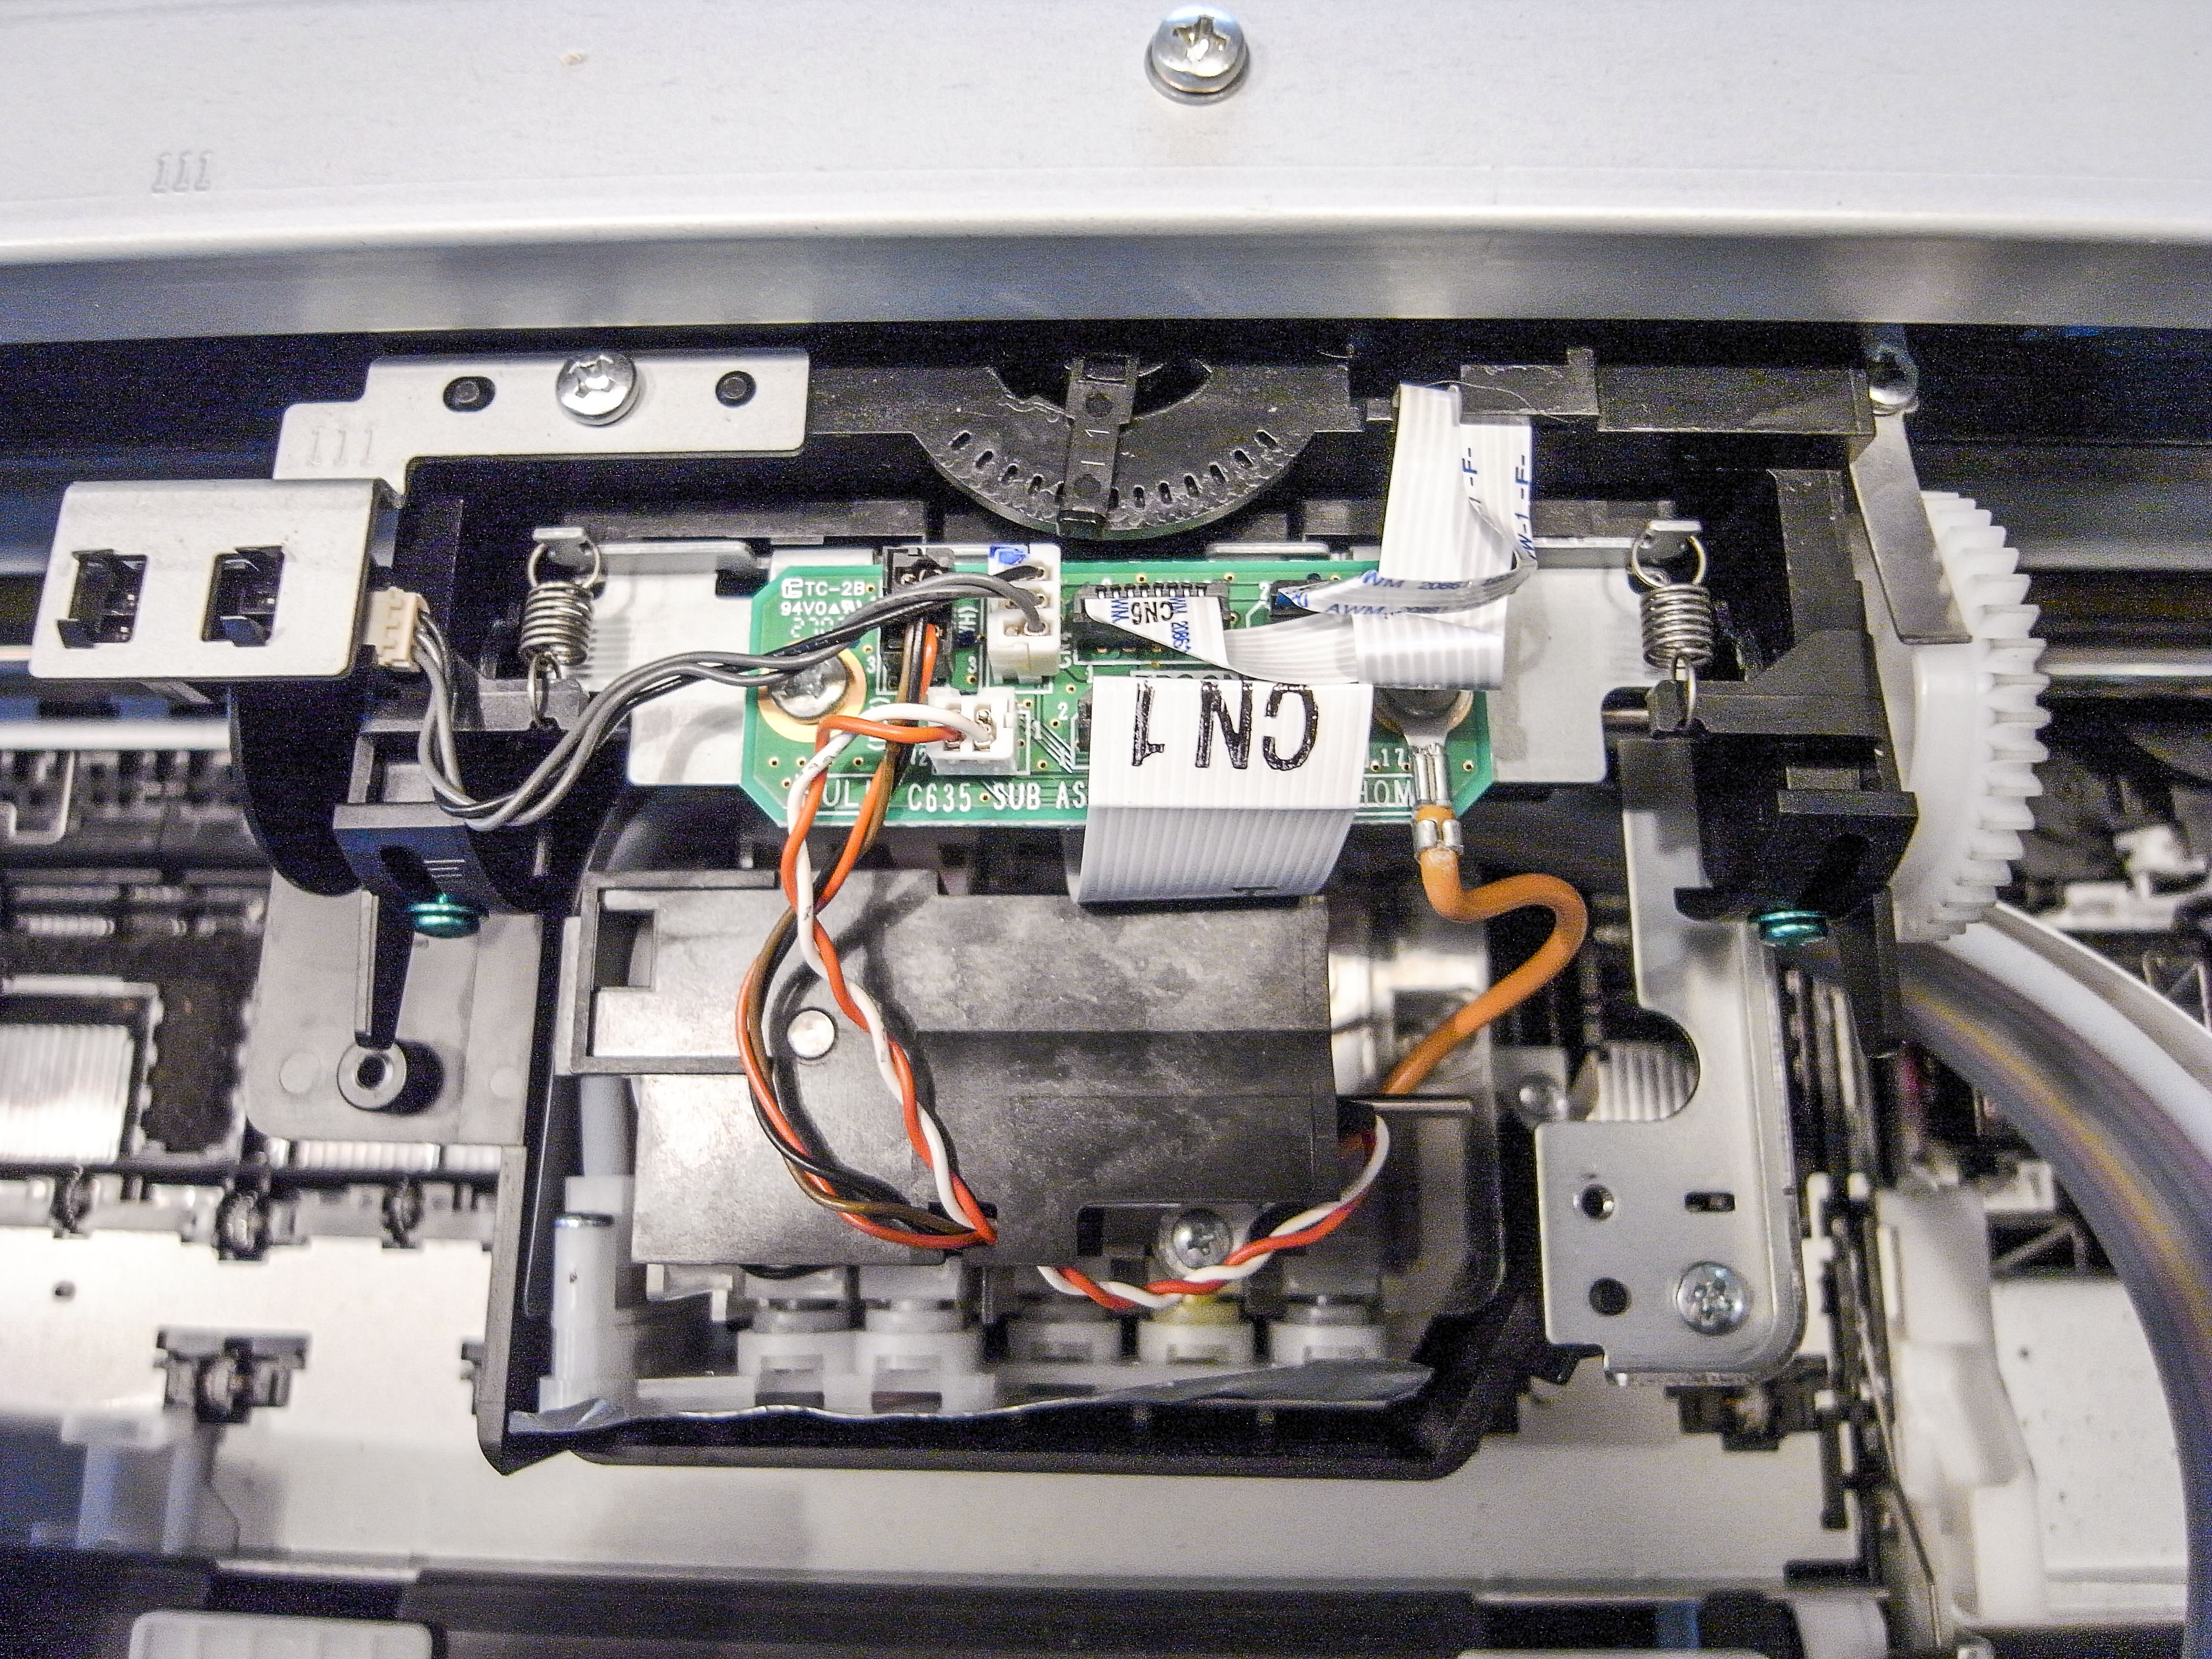 Epson 3800 on the repair bench, detail